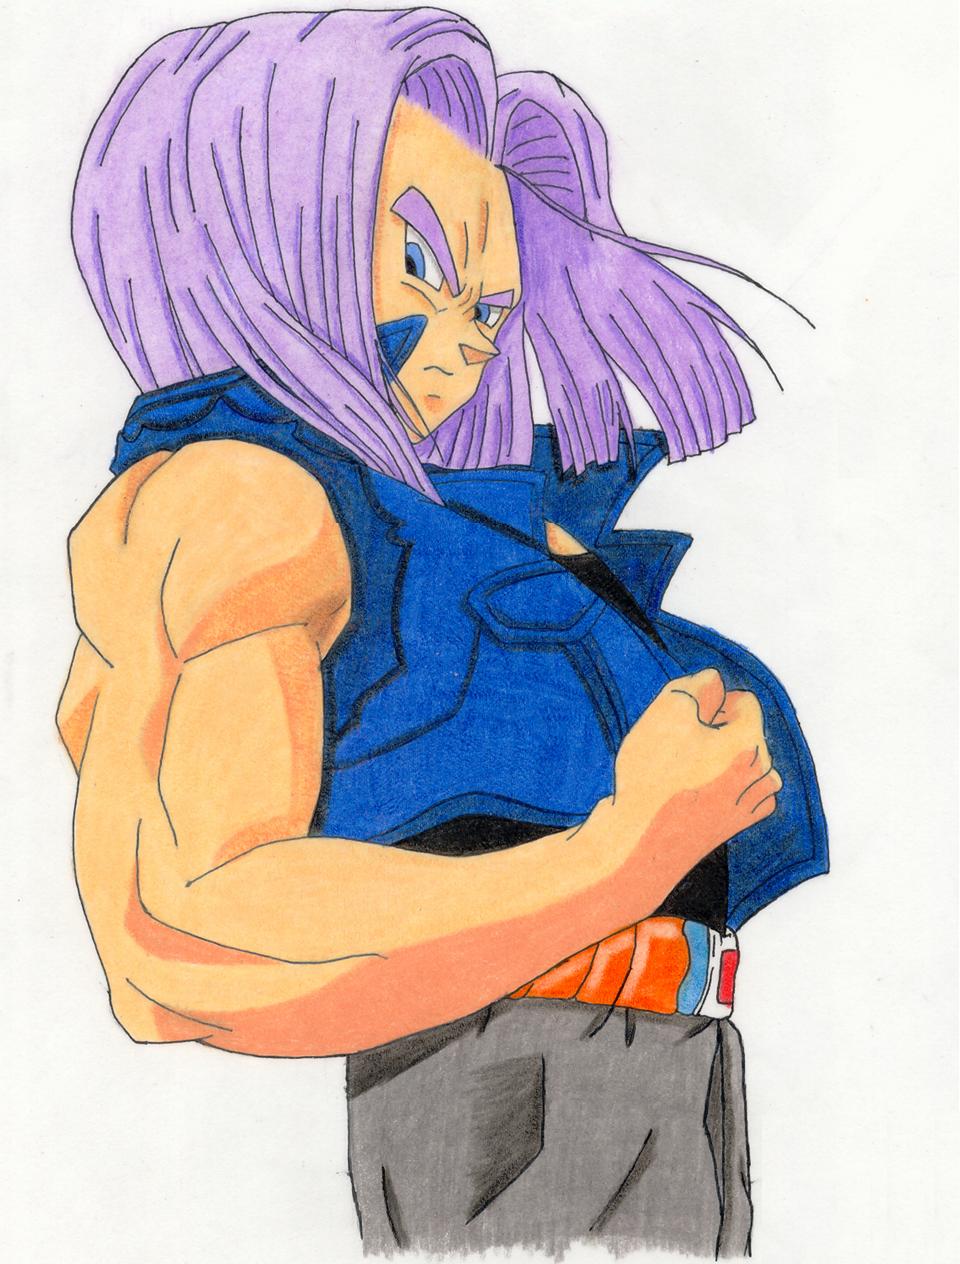 Trunks is HOT by Cosmo4eva on DeviantArt